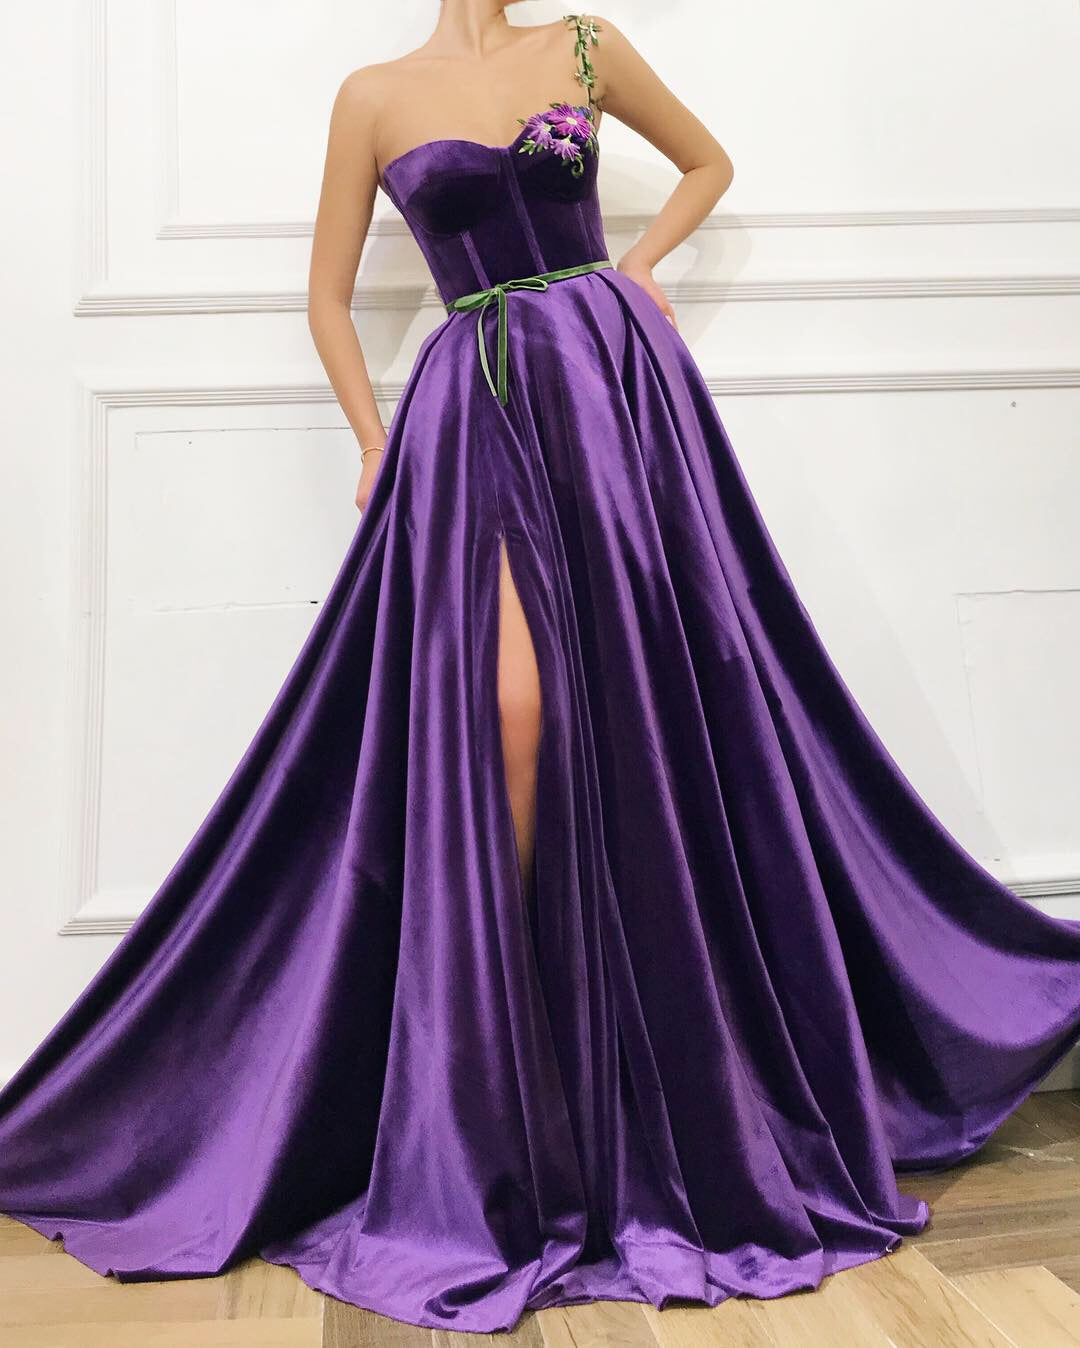 Purple A-Line dress with one spaghetti strap and embroidery